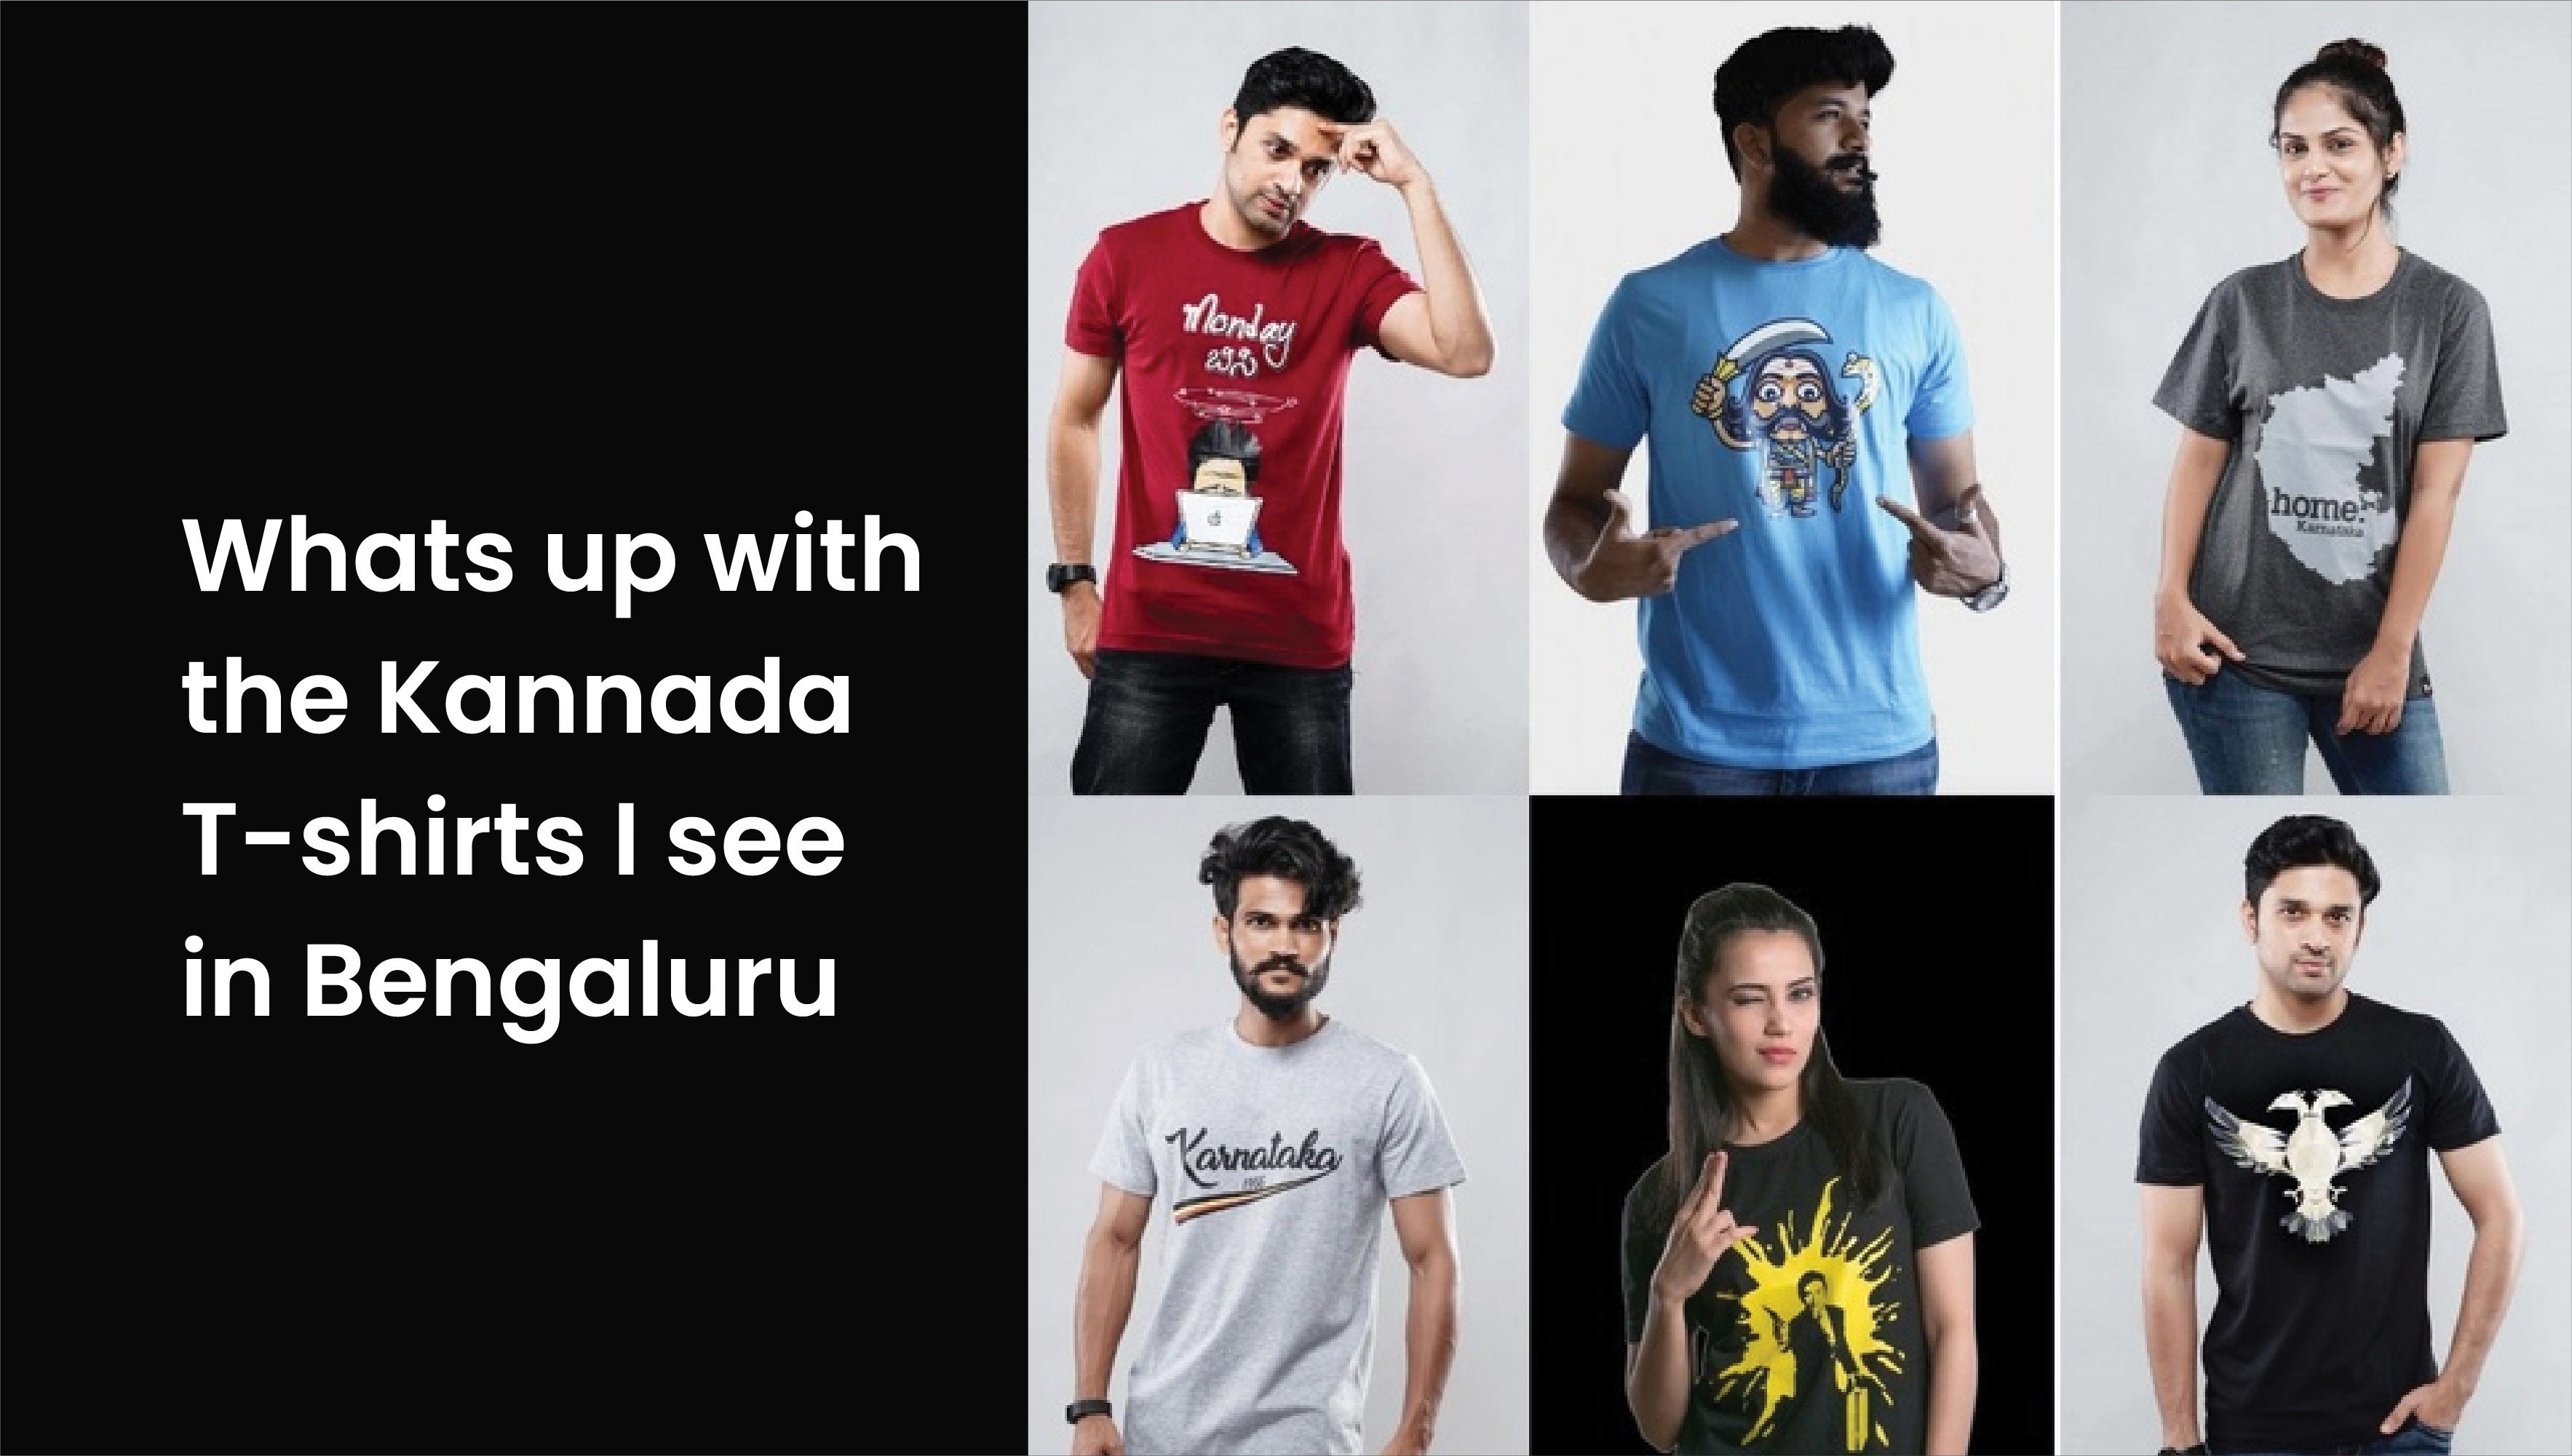 Whats up with the Kannada T-shirts I see in Bengaluru